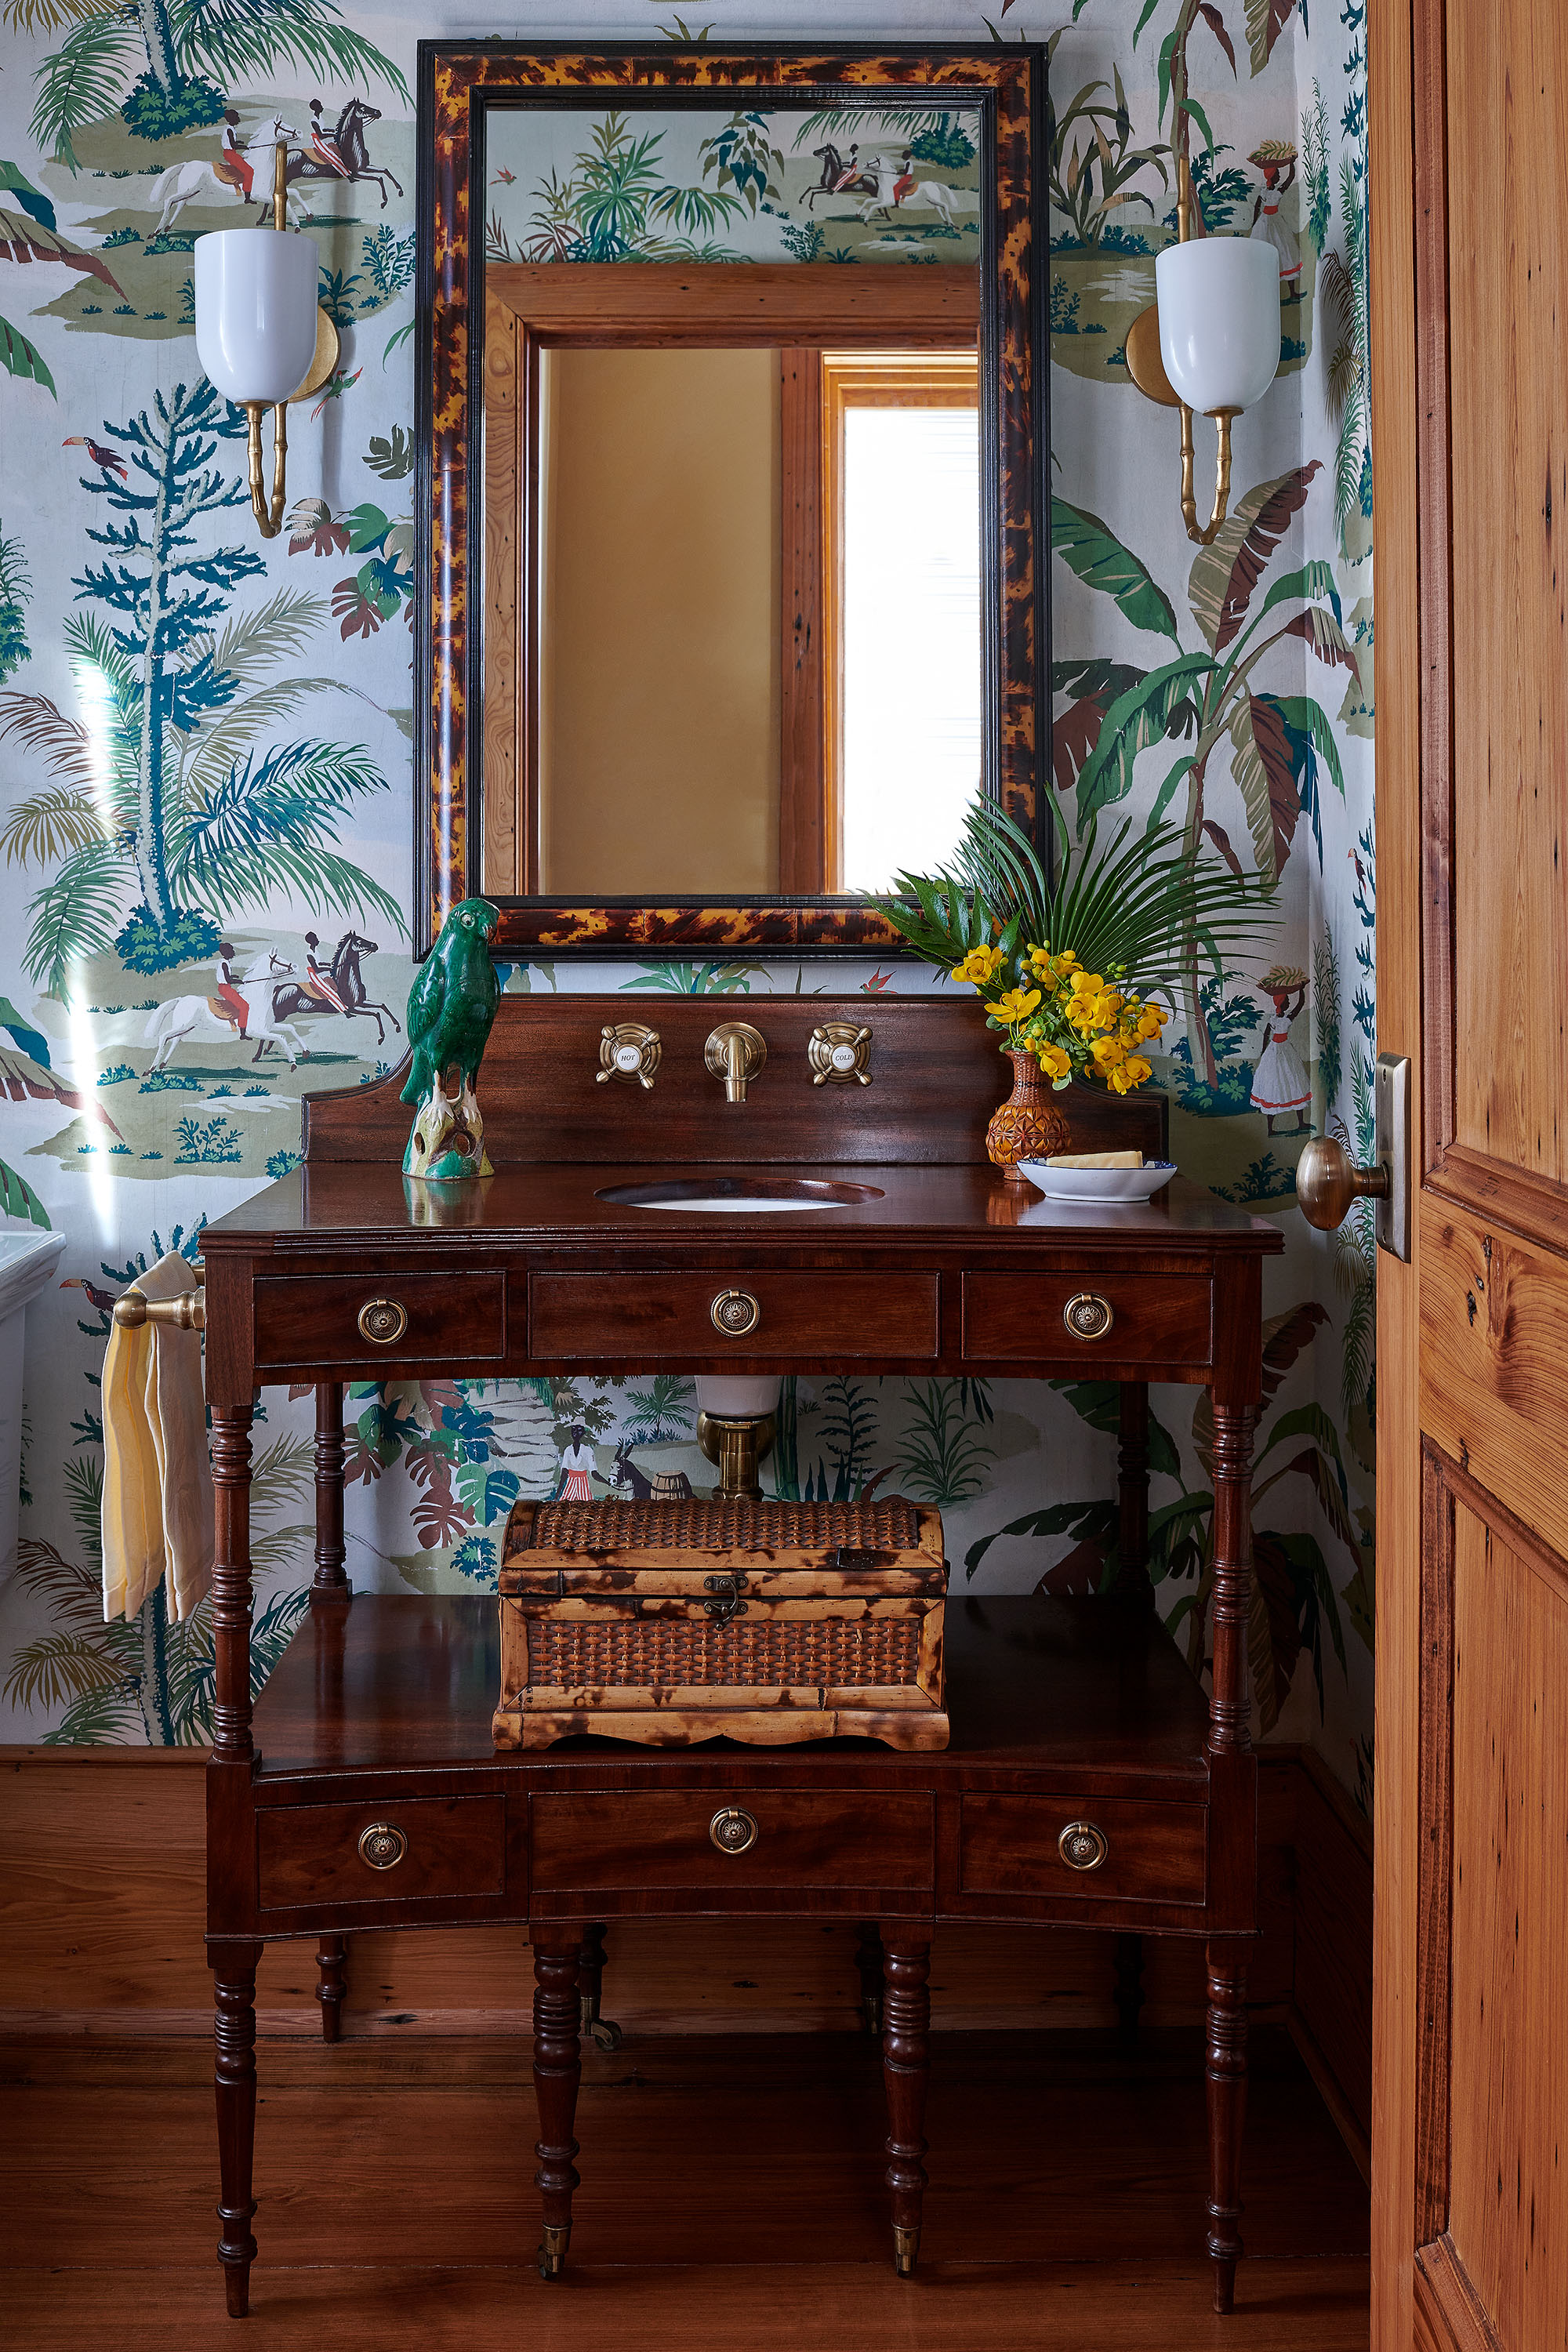 Wallpapered bathroom sink in Louisiana Camp by Melissa Rufty in Garden and Gun Magazine by Alison Gootee photography